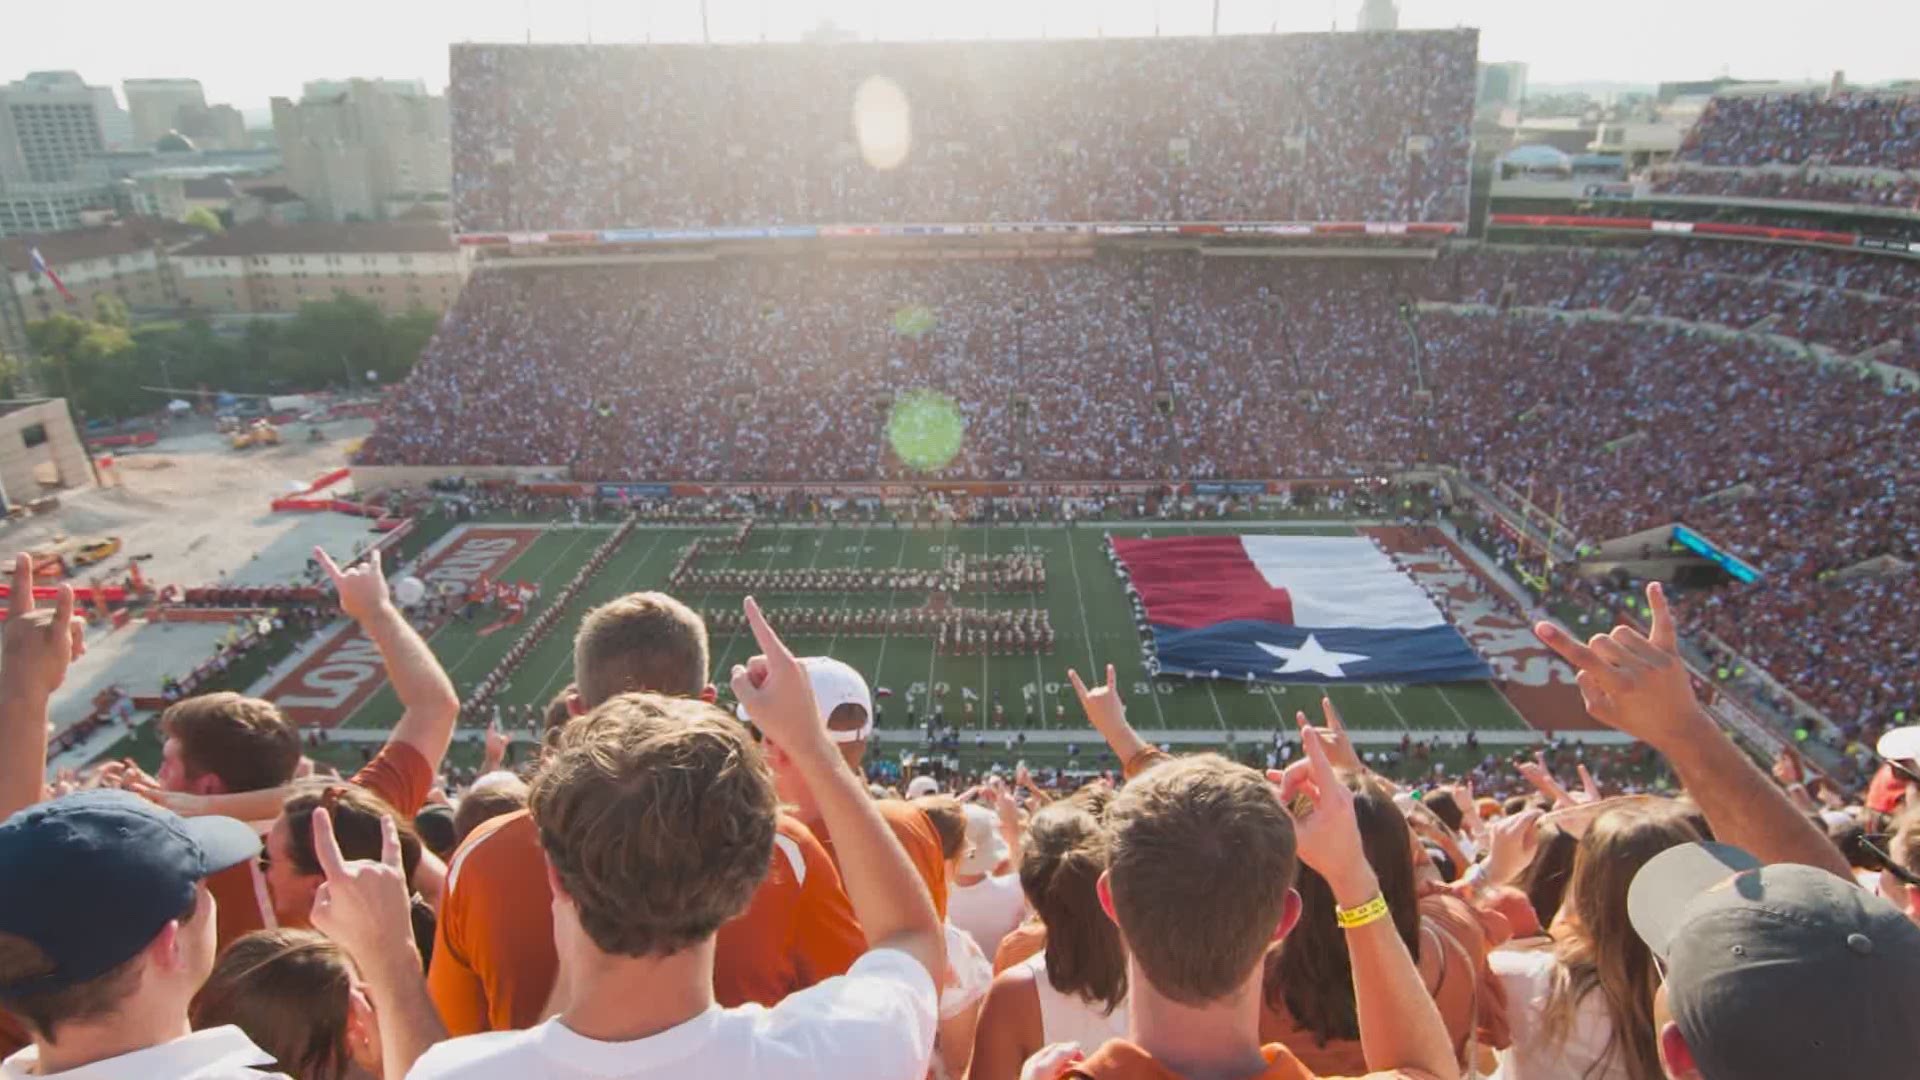 If you're not a season ticket holder, you're going to have an even tougher time than usual getting into a Texas Football game this season.